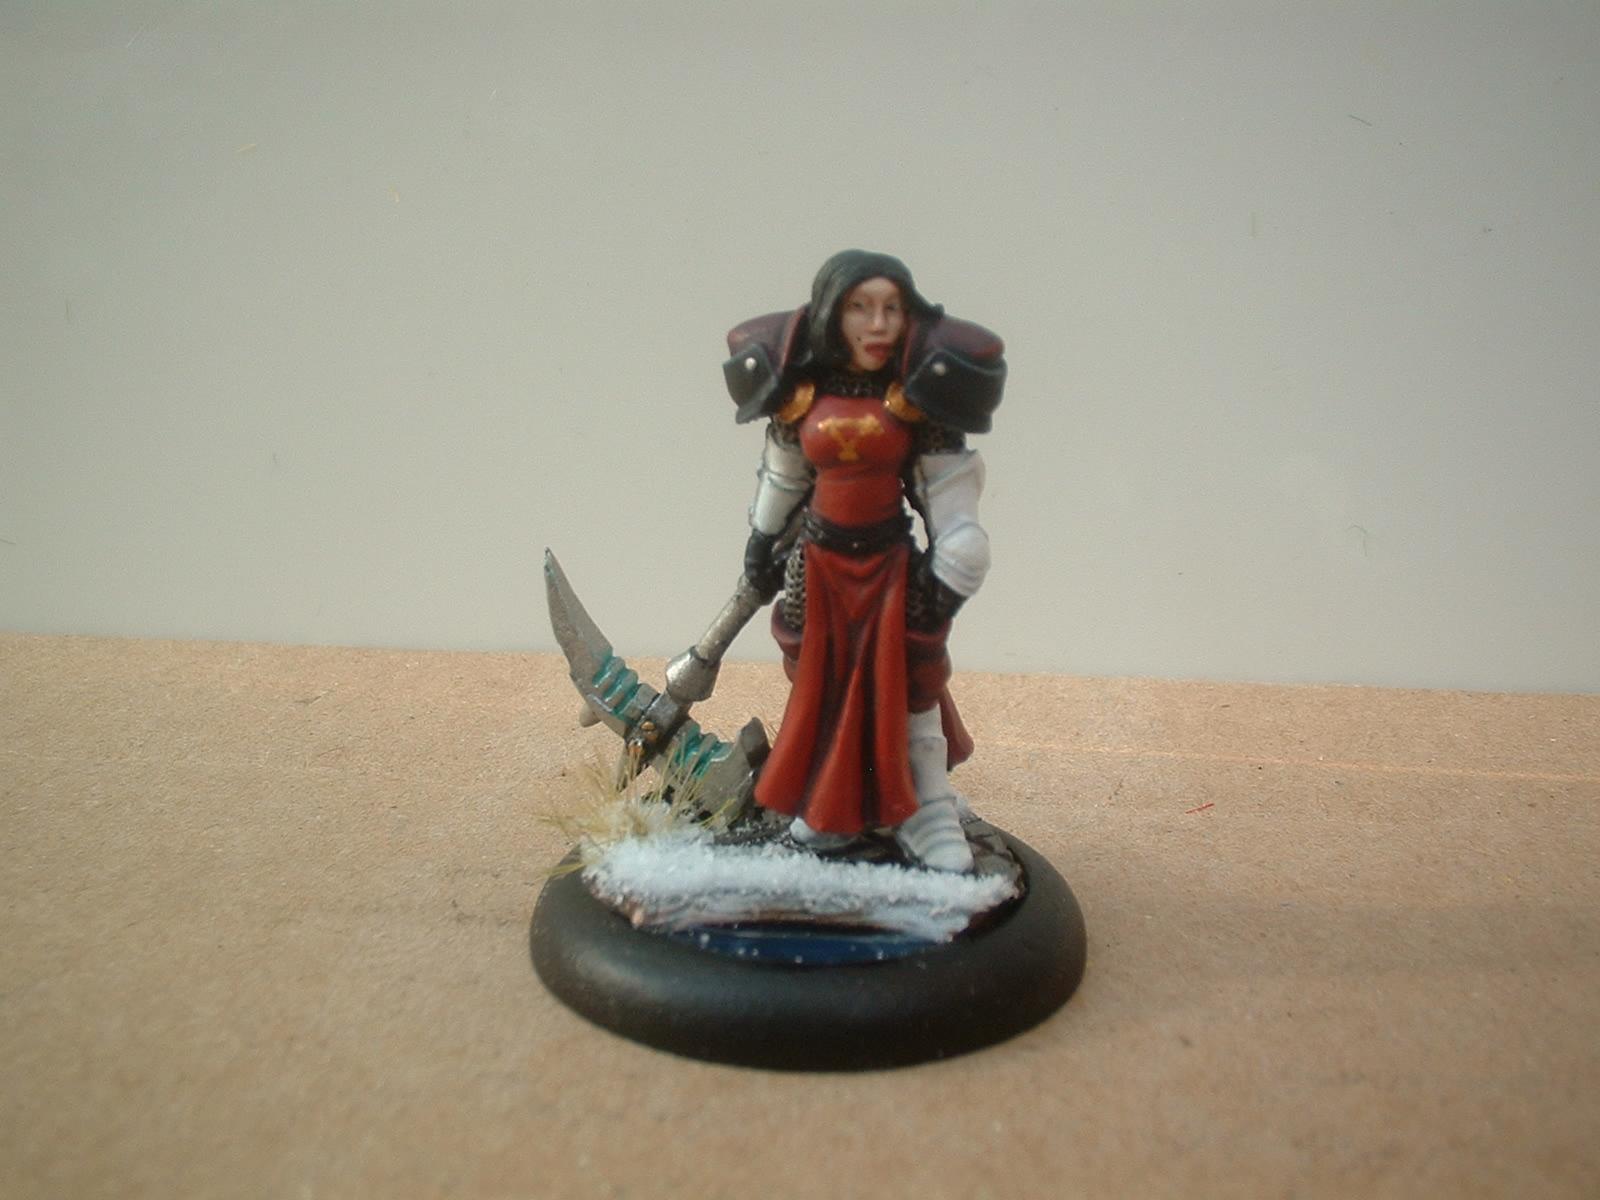 First up was basing Sorcha